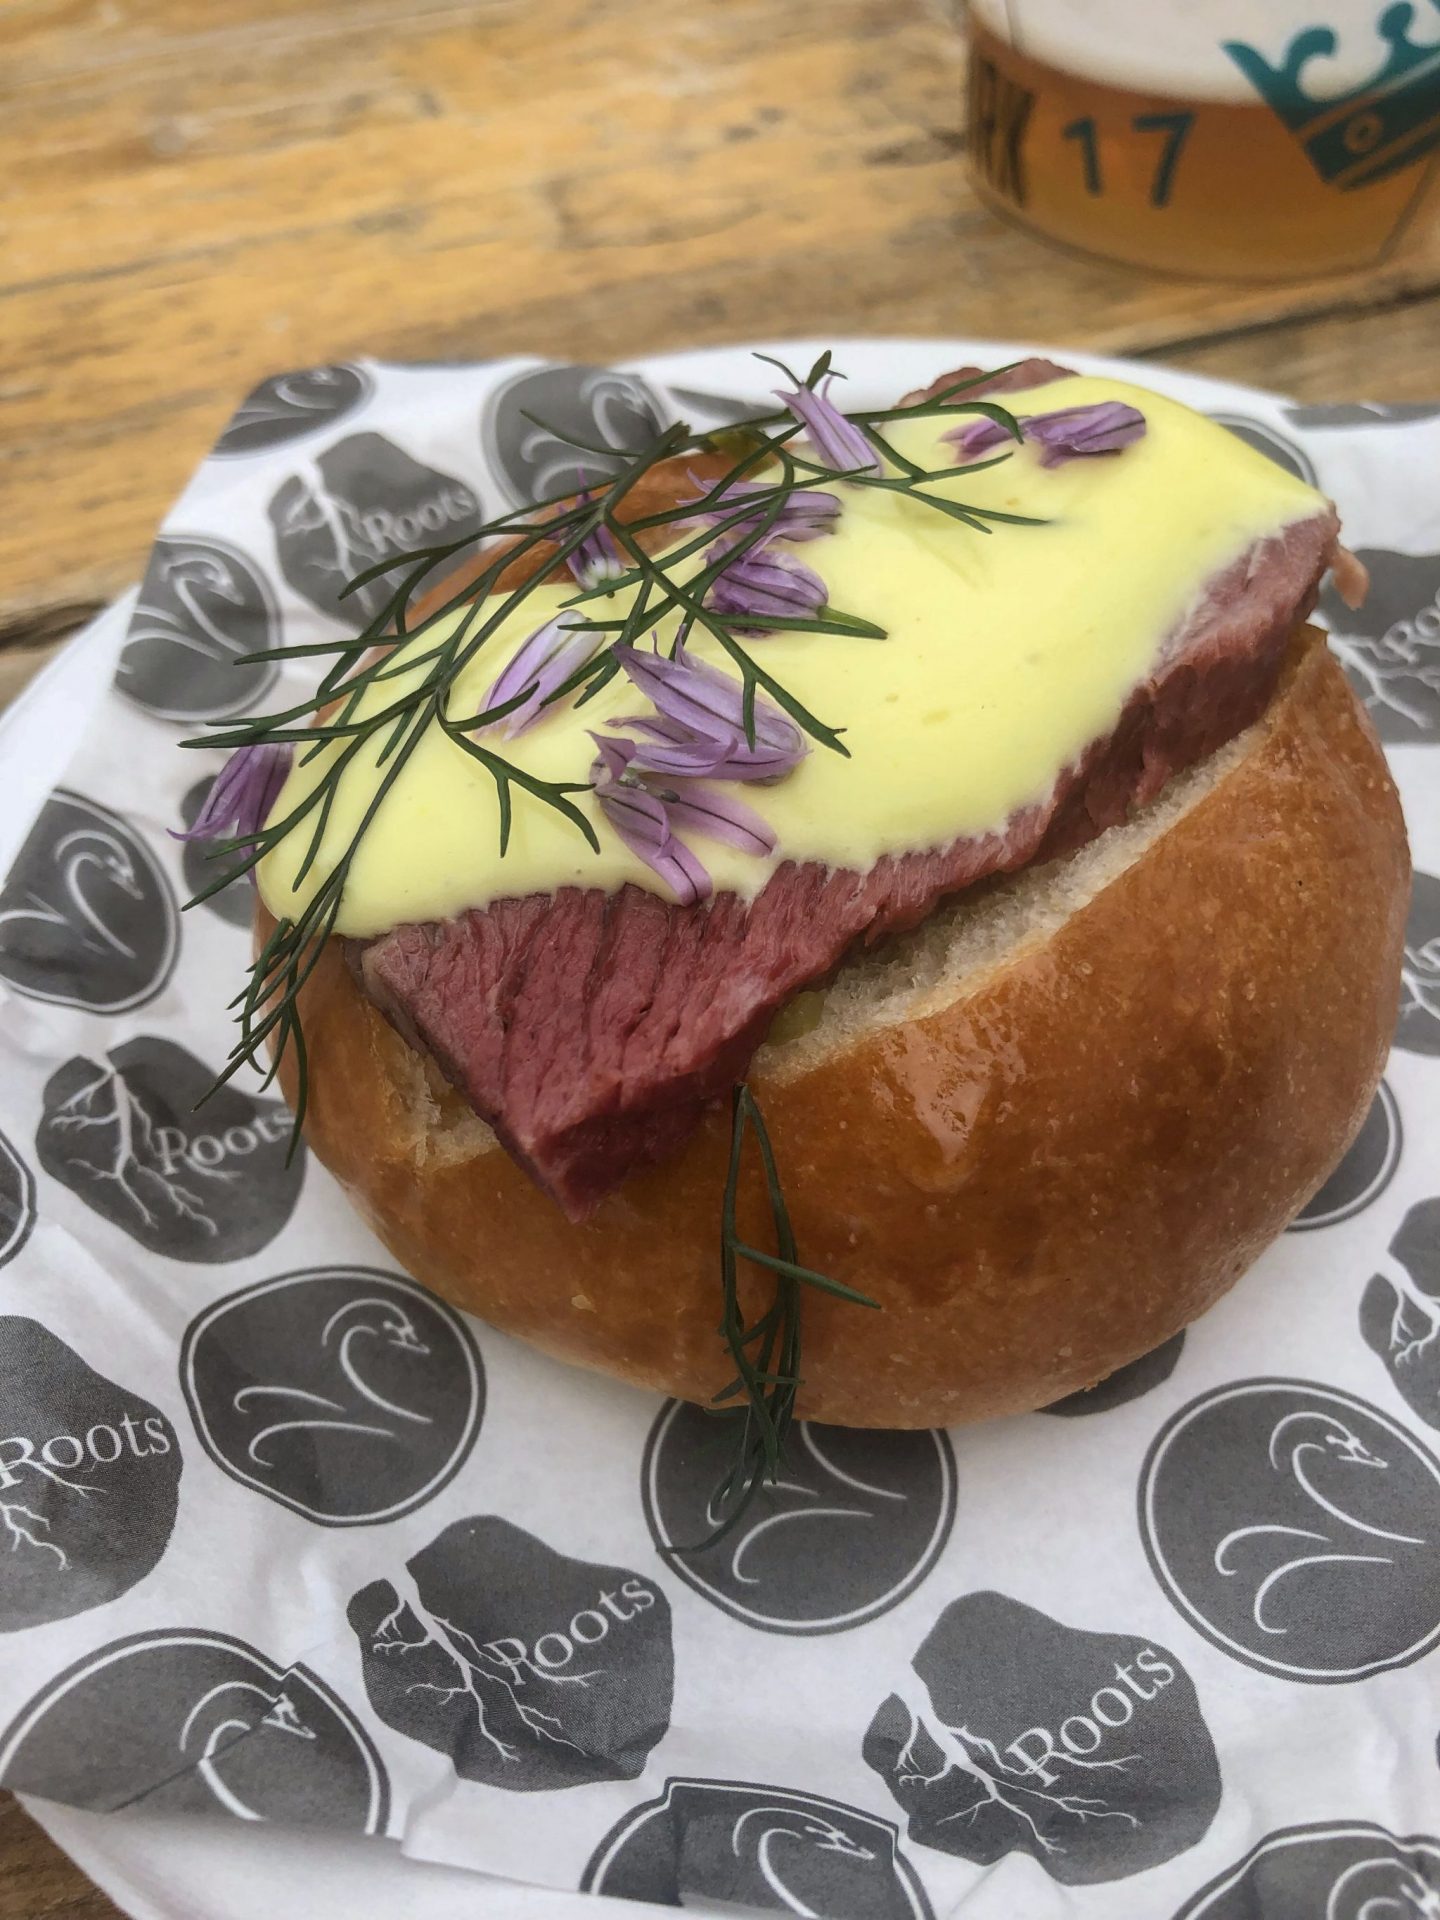 Beautifully presented bao bun with colourful flowers on top at Pub in the Park 2019